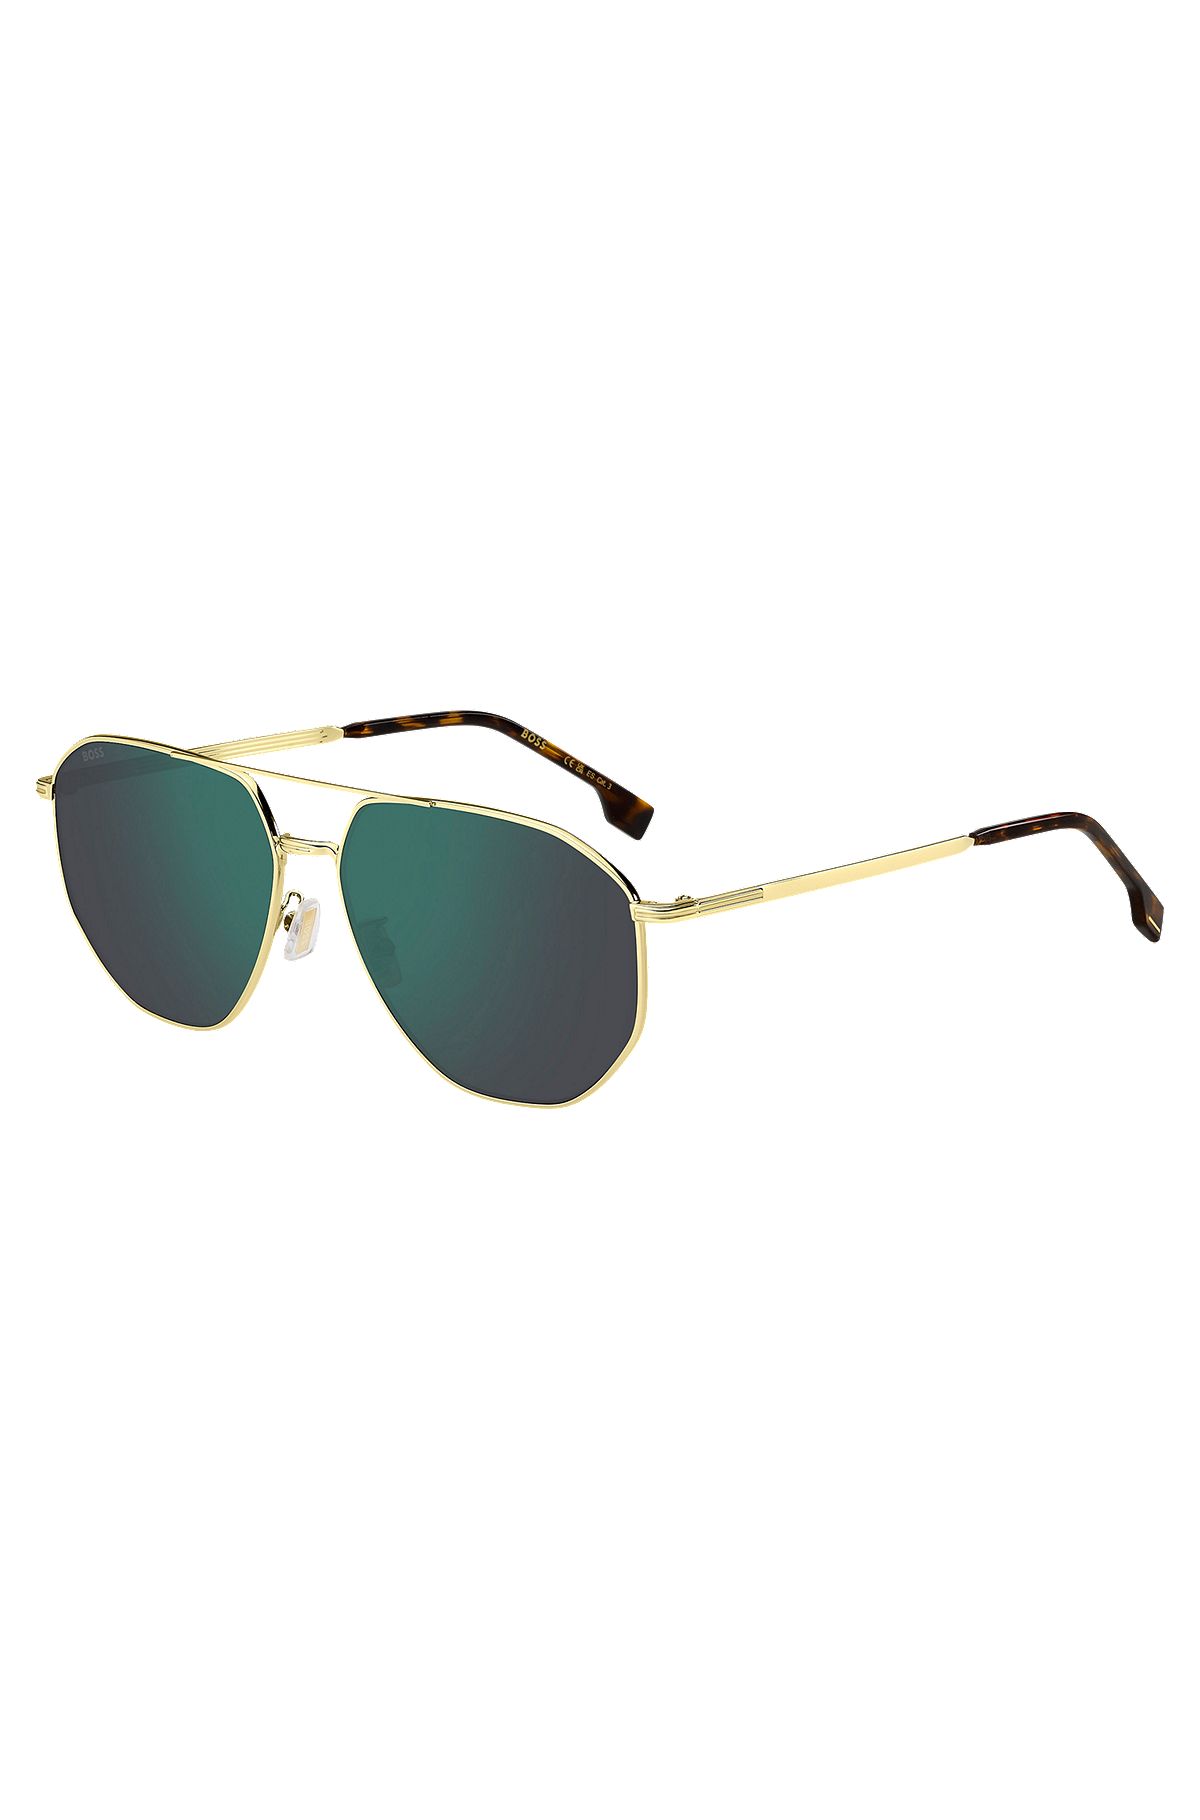 Gold-tone sunglasses with green lenses, Gold